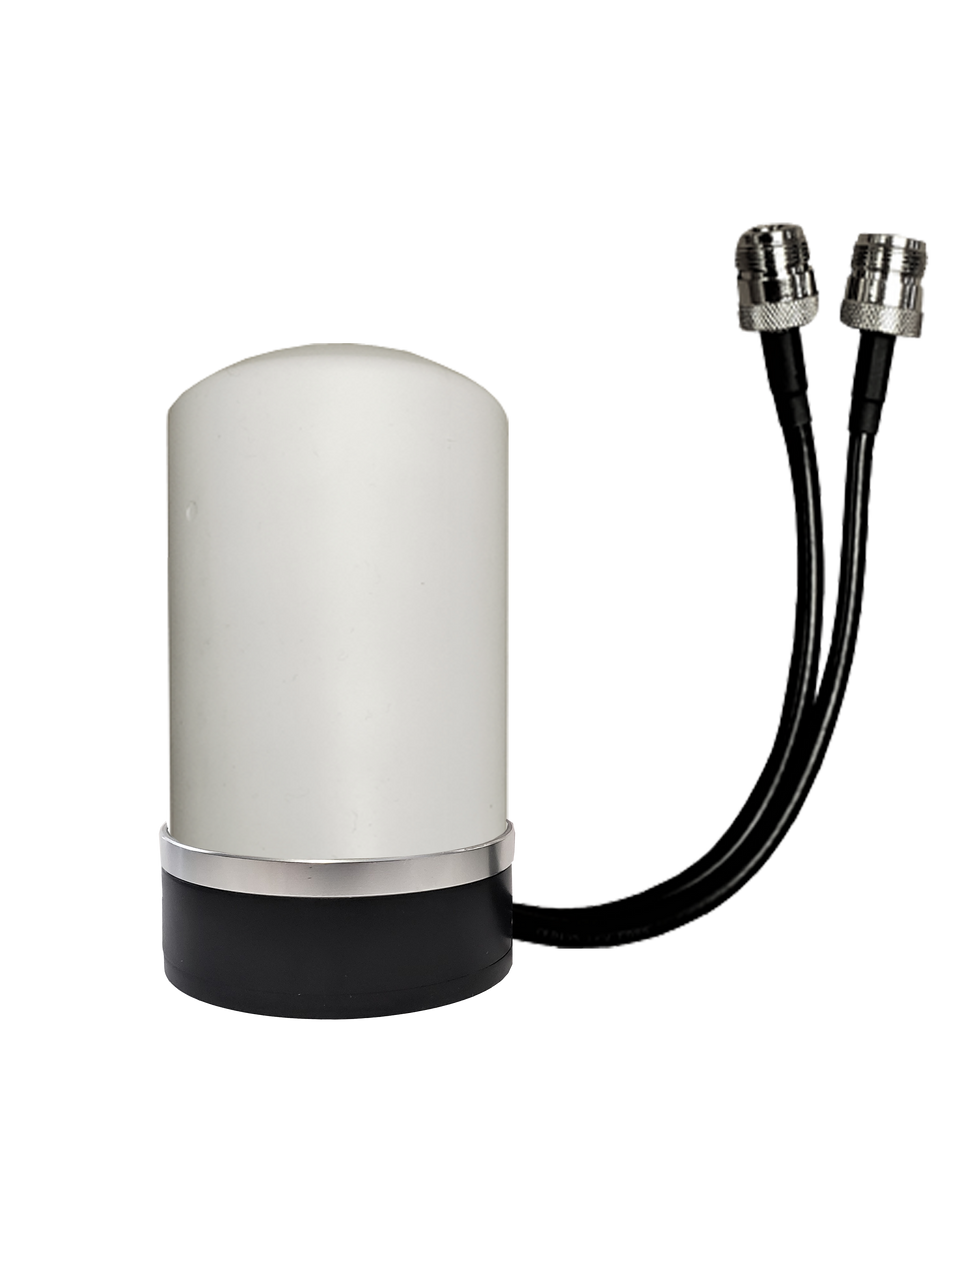 Peplink BR1-Classic - M17M Omni Directional MIMO Cellular 4G 5G LTE AWS XLTE M2M IoT Antenna - Magnetic Base w/1FT N-Female Coax Cables. w/ Cable Length Options